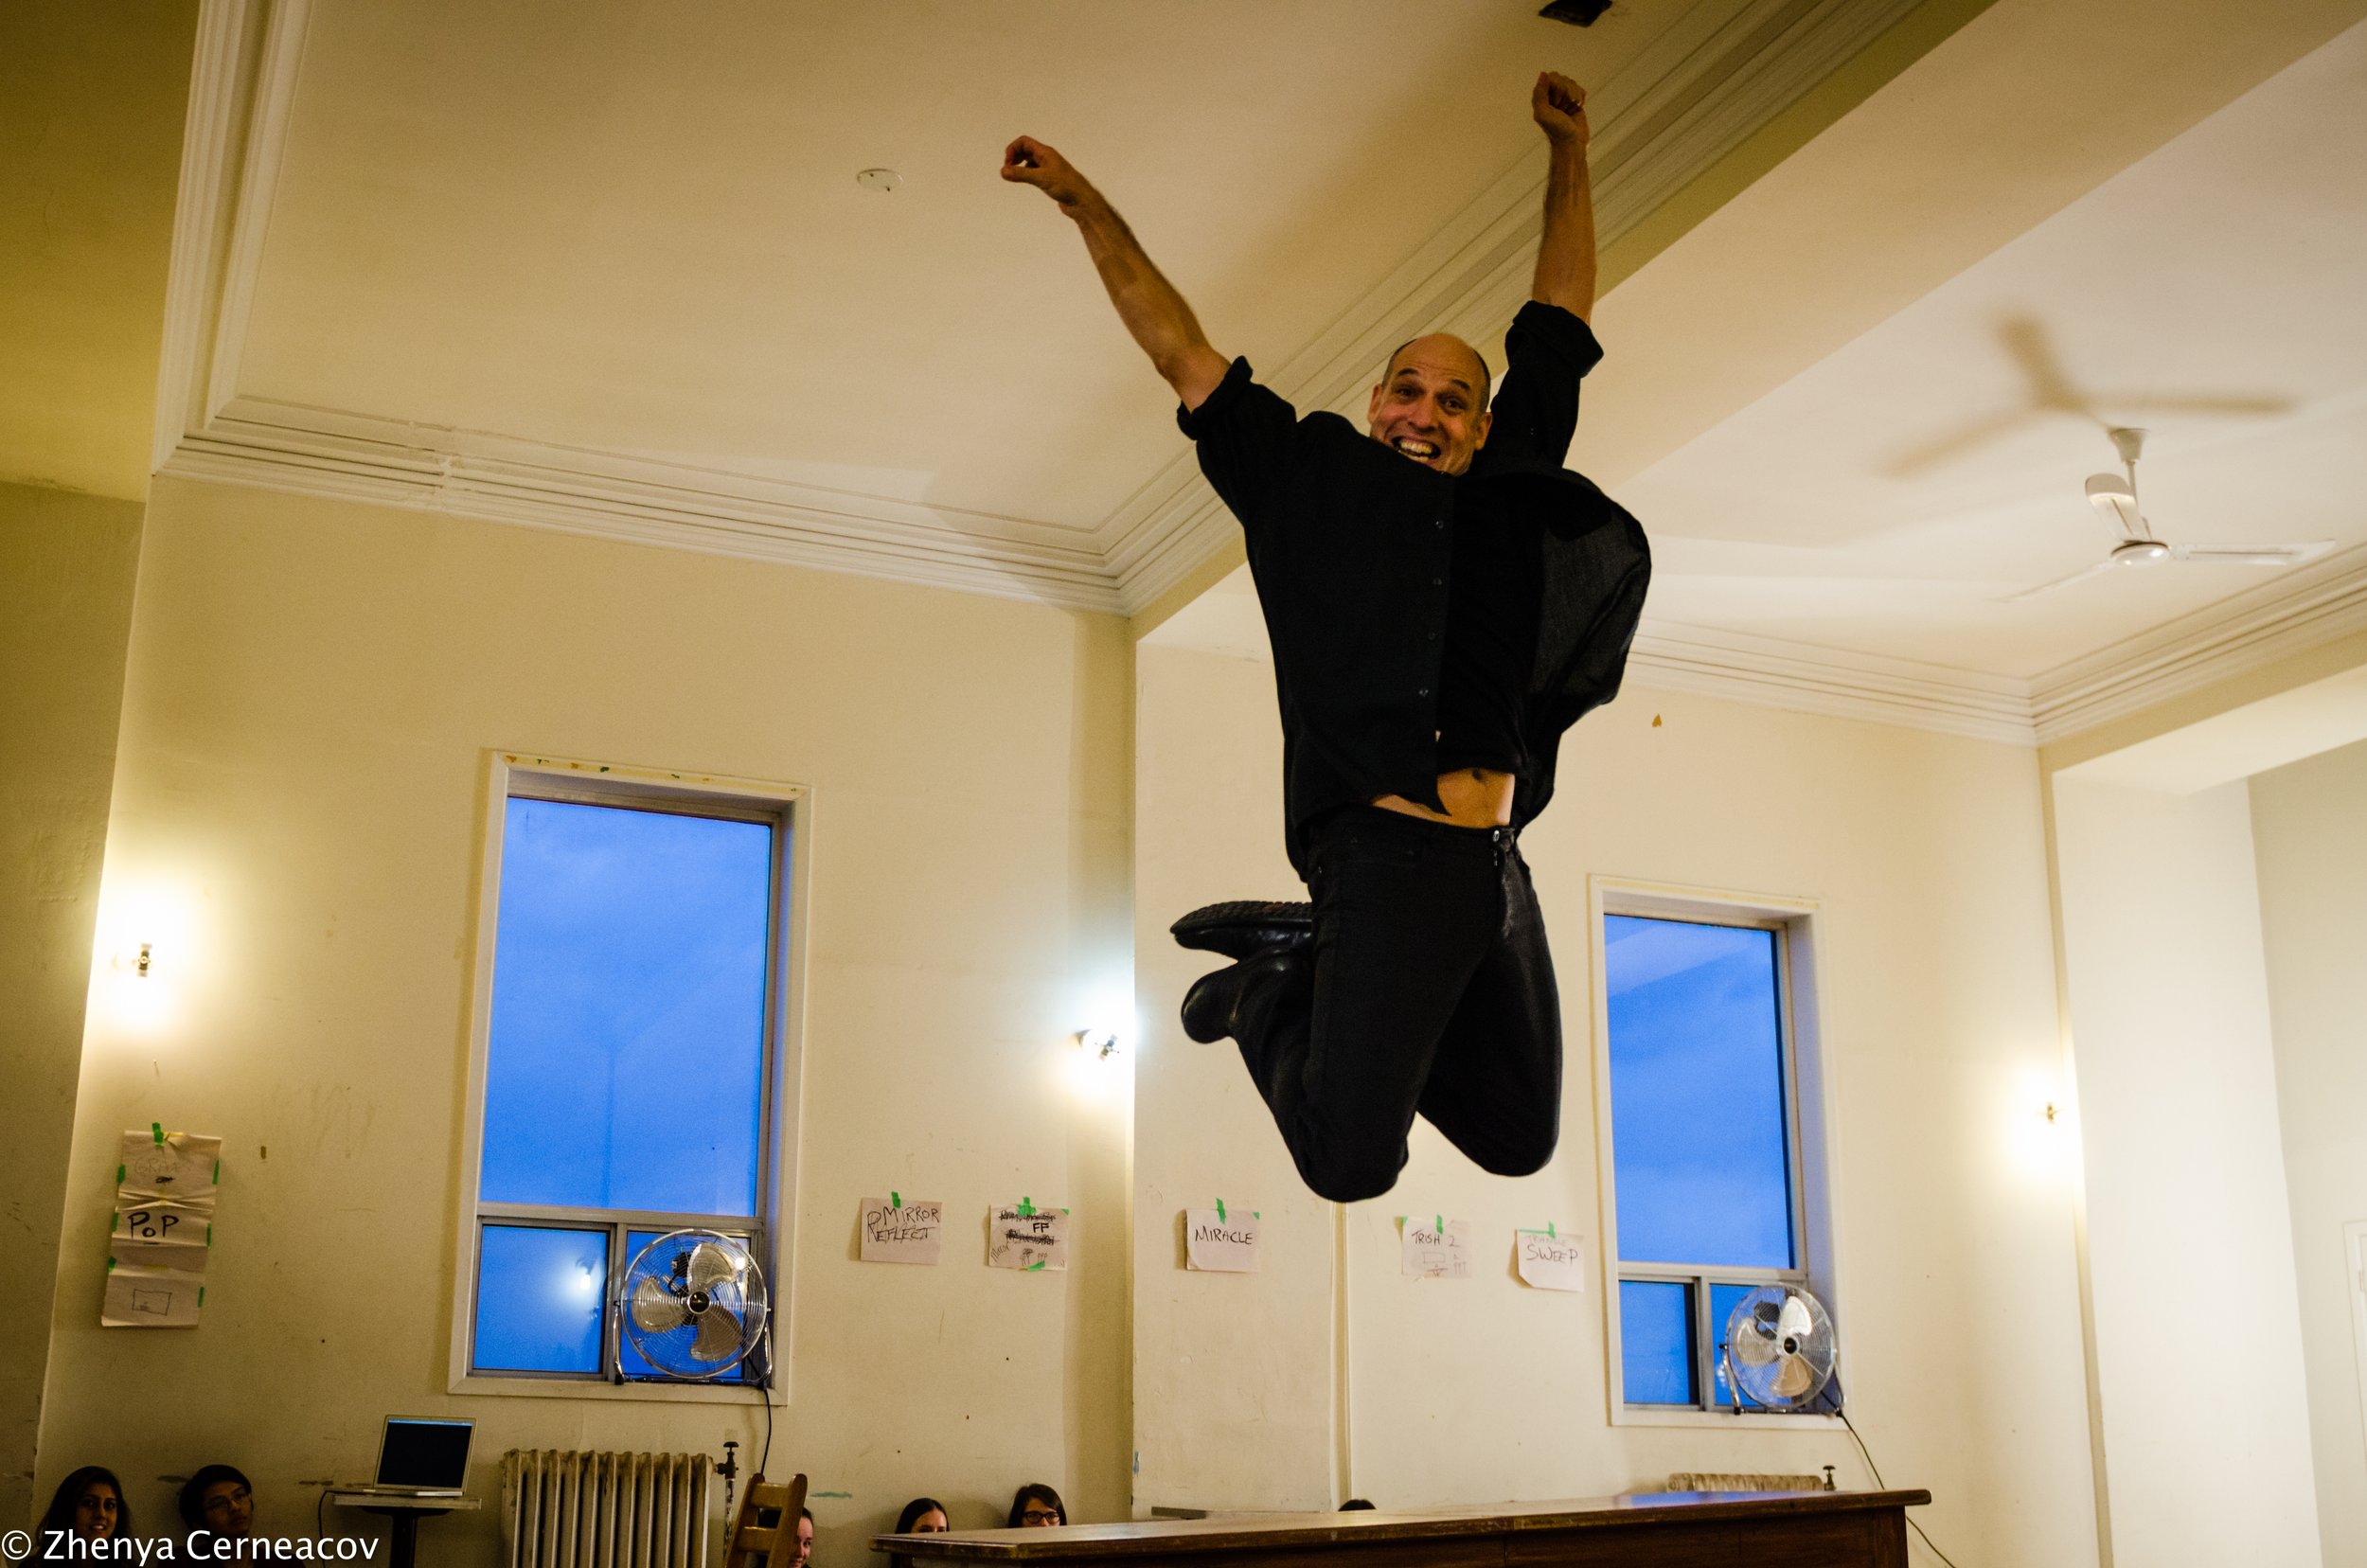 Allen leaps into the air with arms raised overhead.